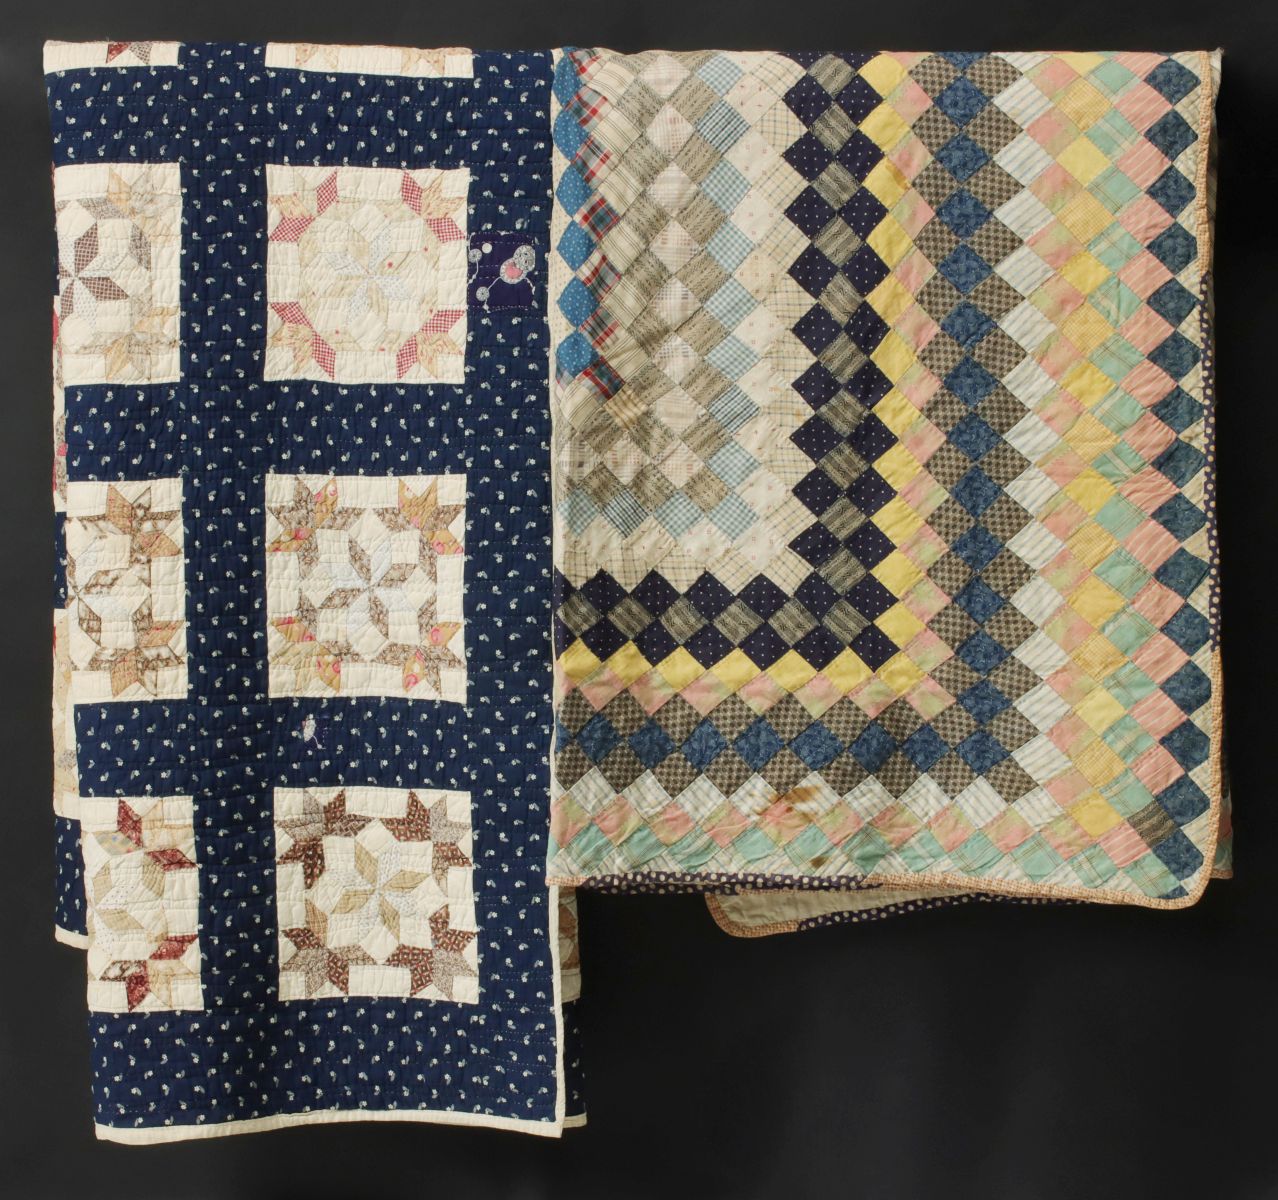 'TRIP AROUND THE WORLD' AND ANOTHER ANTIQUE QUILT